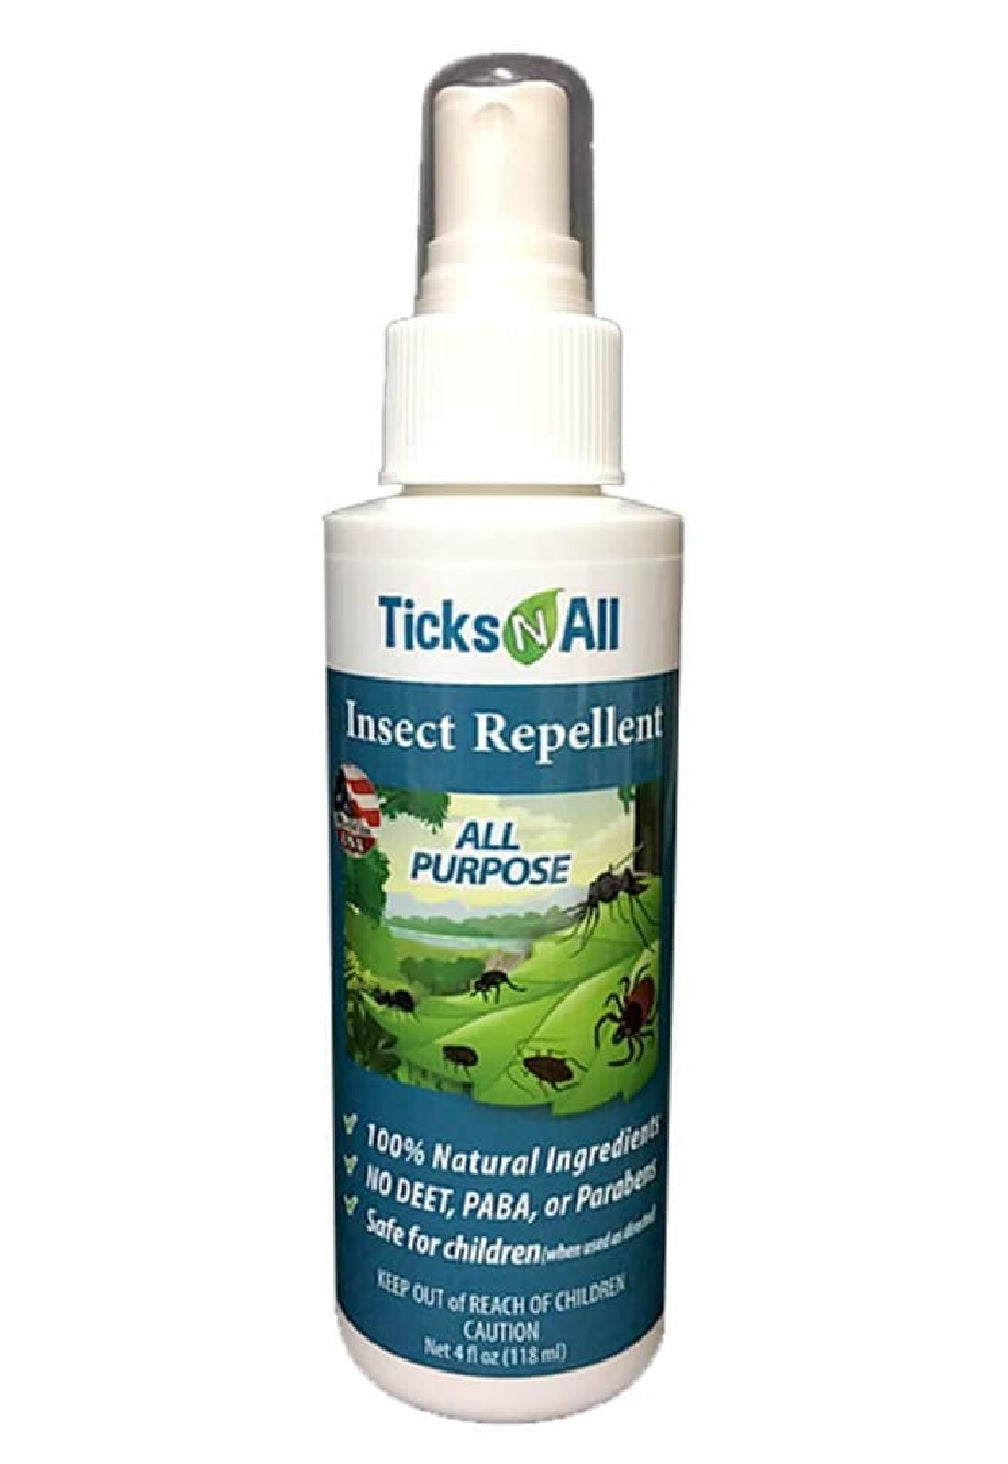 Ticks-N-All KM100 All Natural Insect Repellent, 4 Ounce